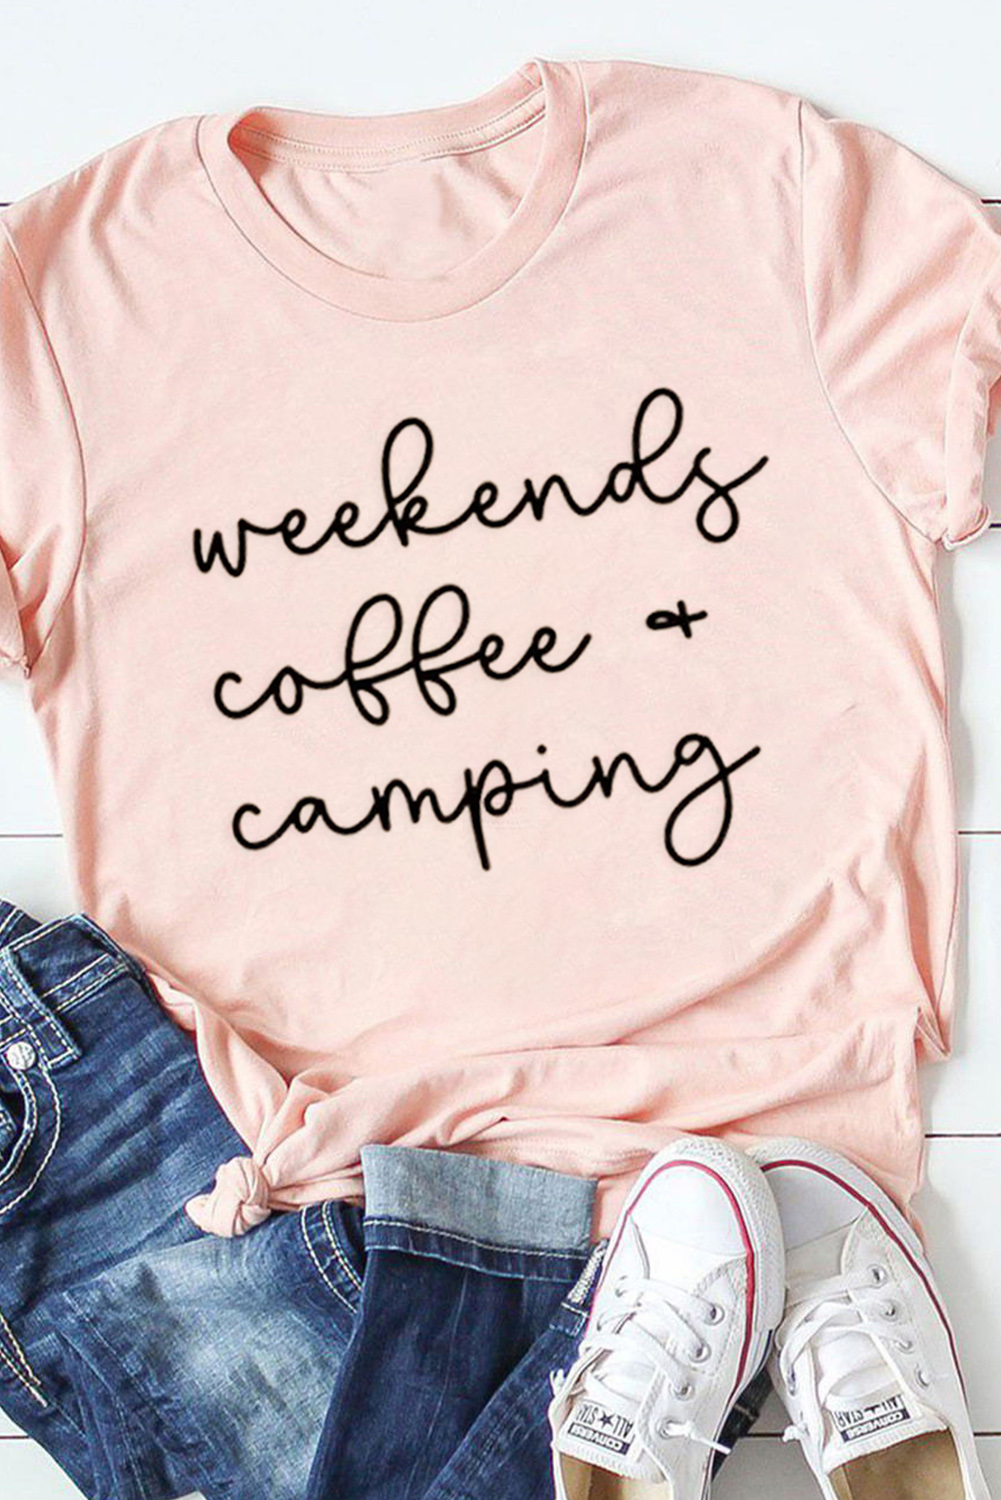 Wholesale Casual Weekends COFFEE Camping Letter Printed Pink Graphic Tee 